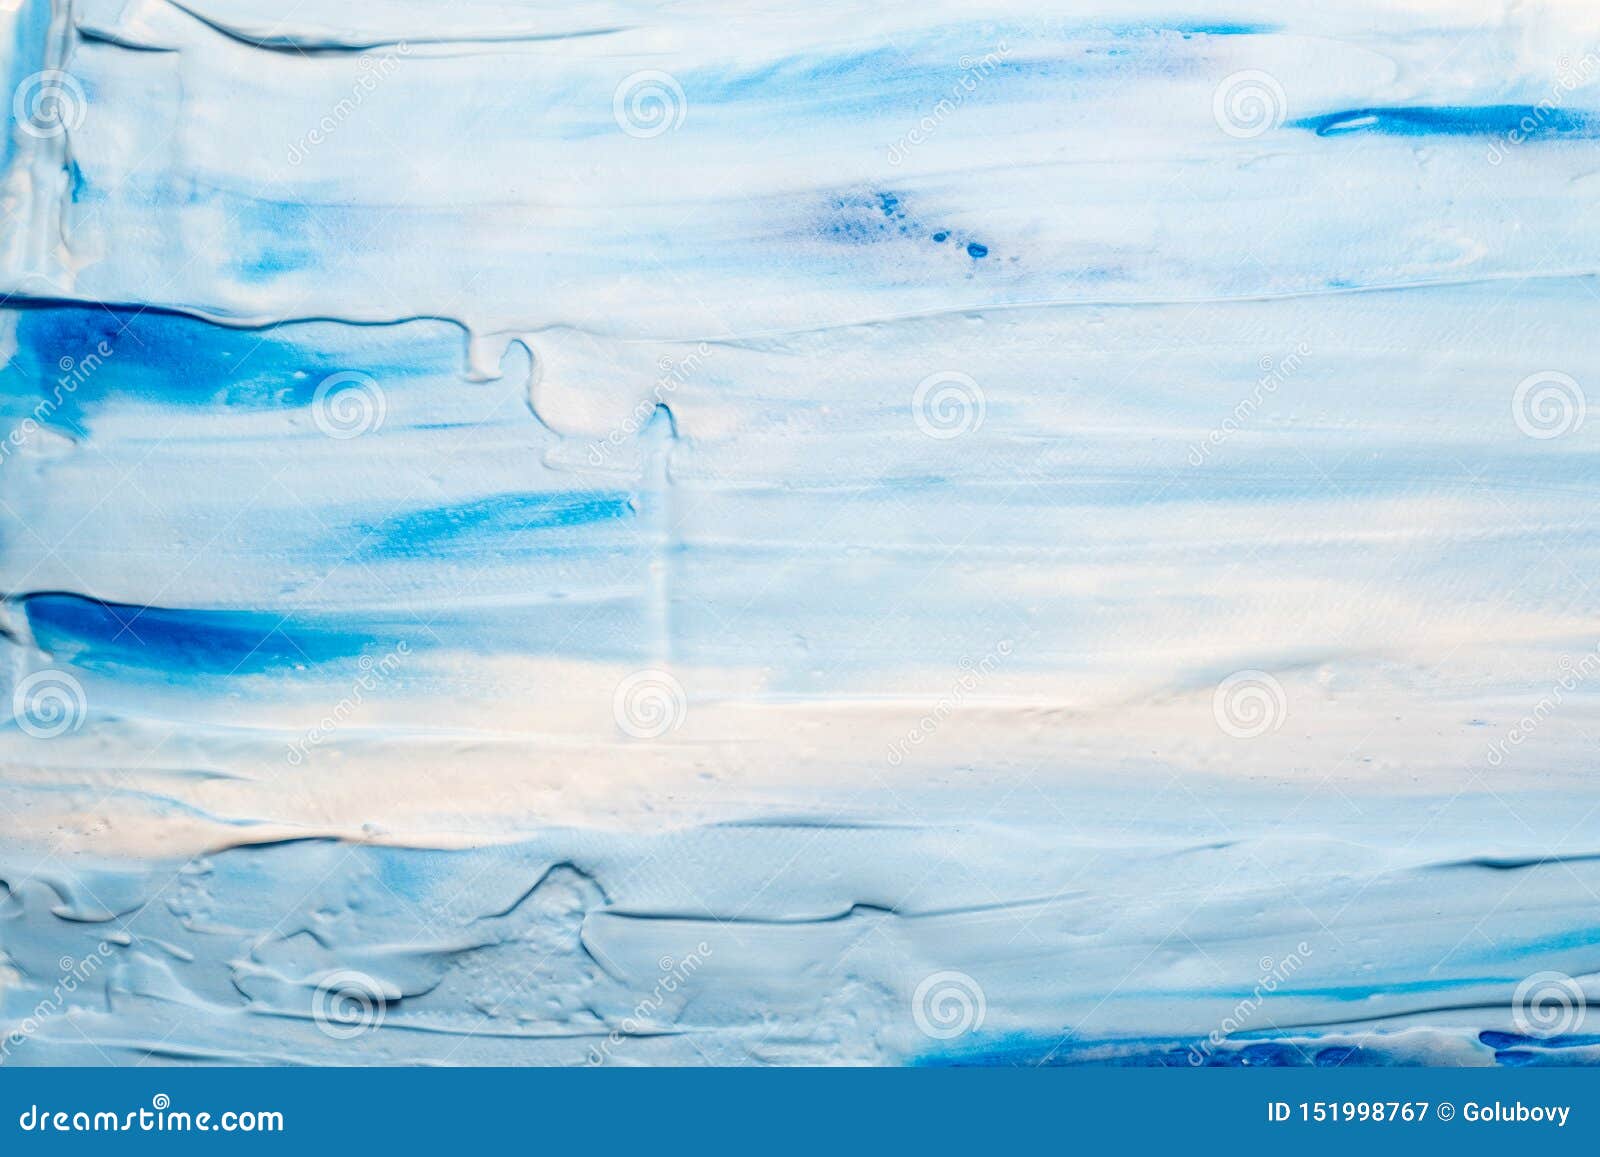 Blue White Acrylic Paint Background Sky Clouds Stock Image - Image of  copyspace, foam: 151998767